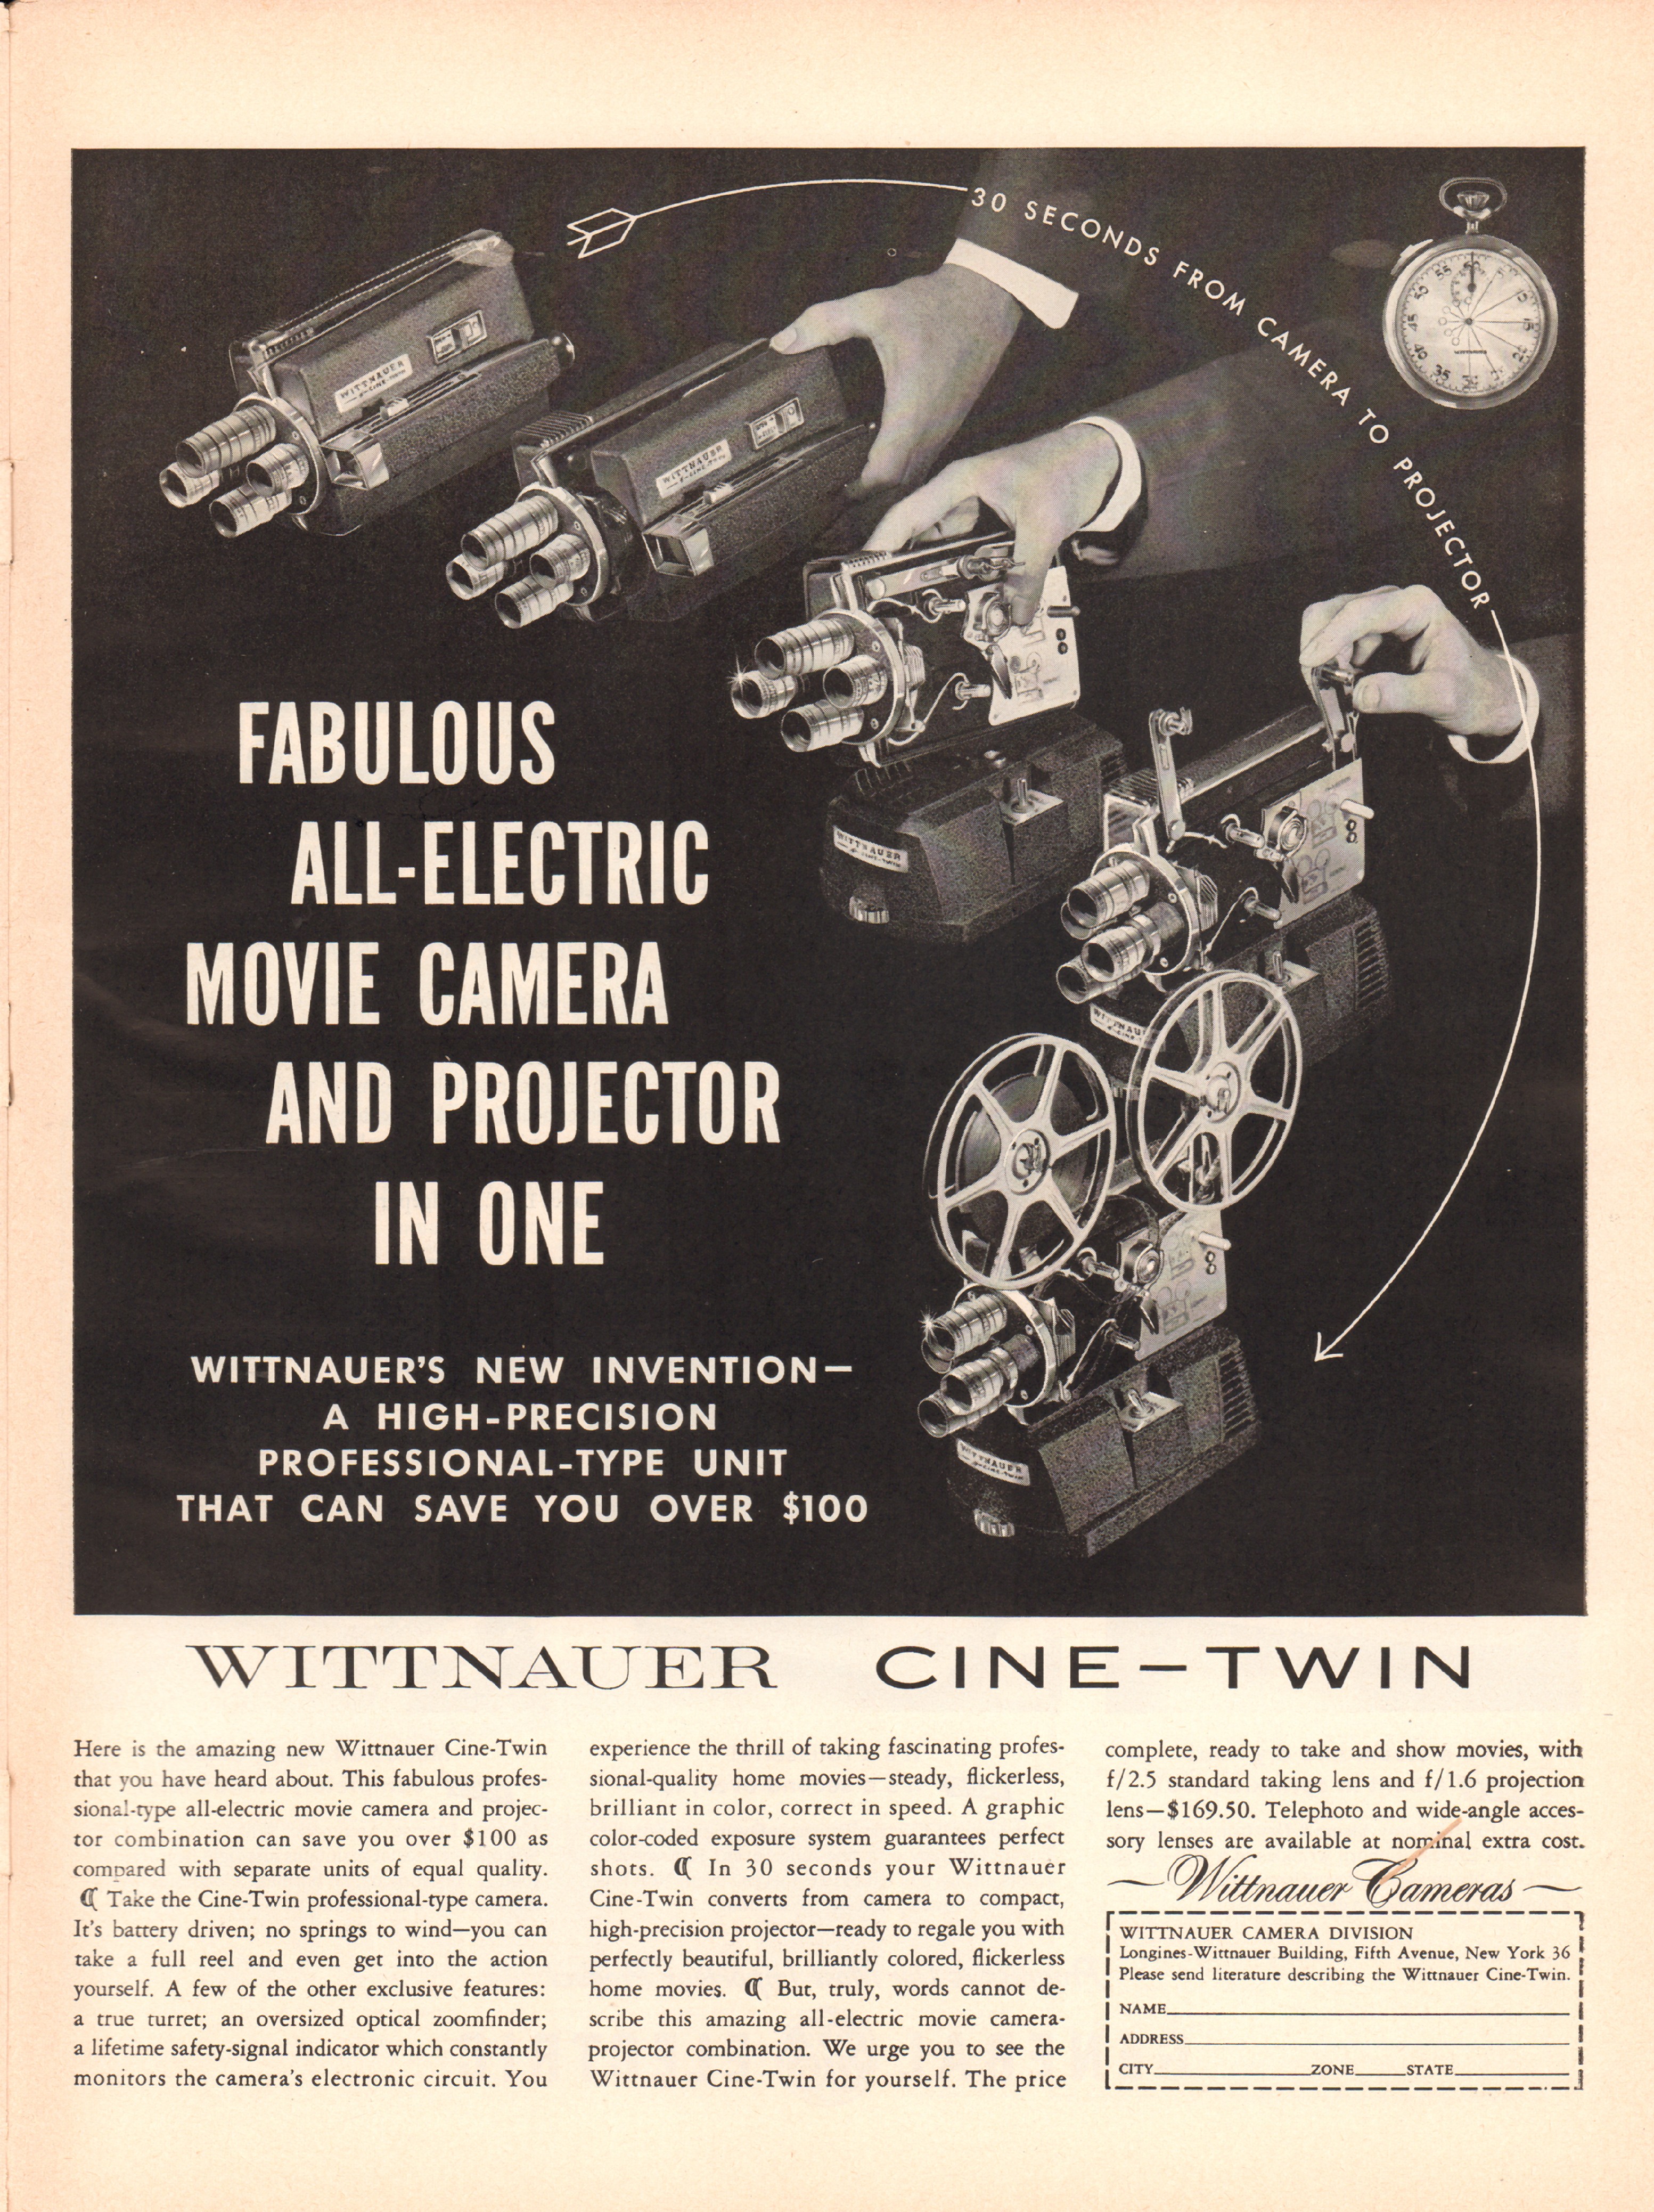 Wittnauer Cameras - published in Life - November 10, 1958